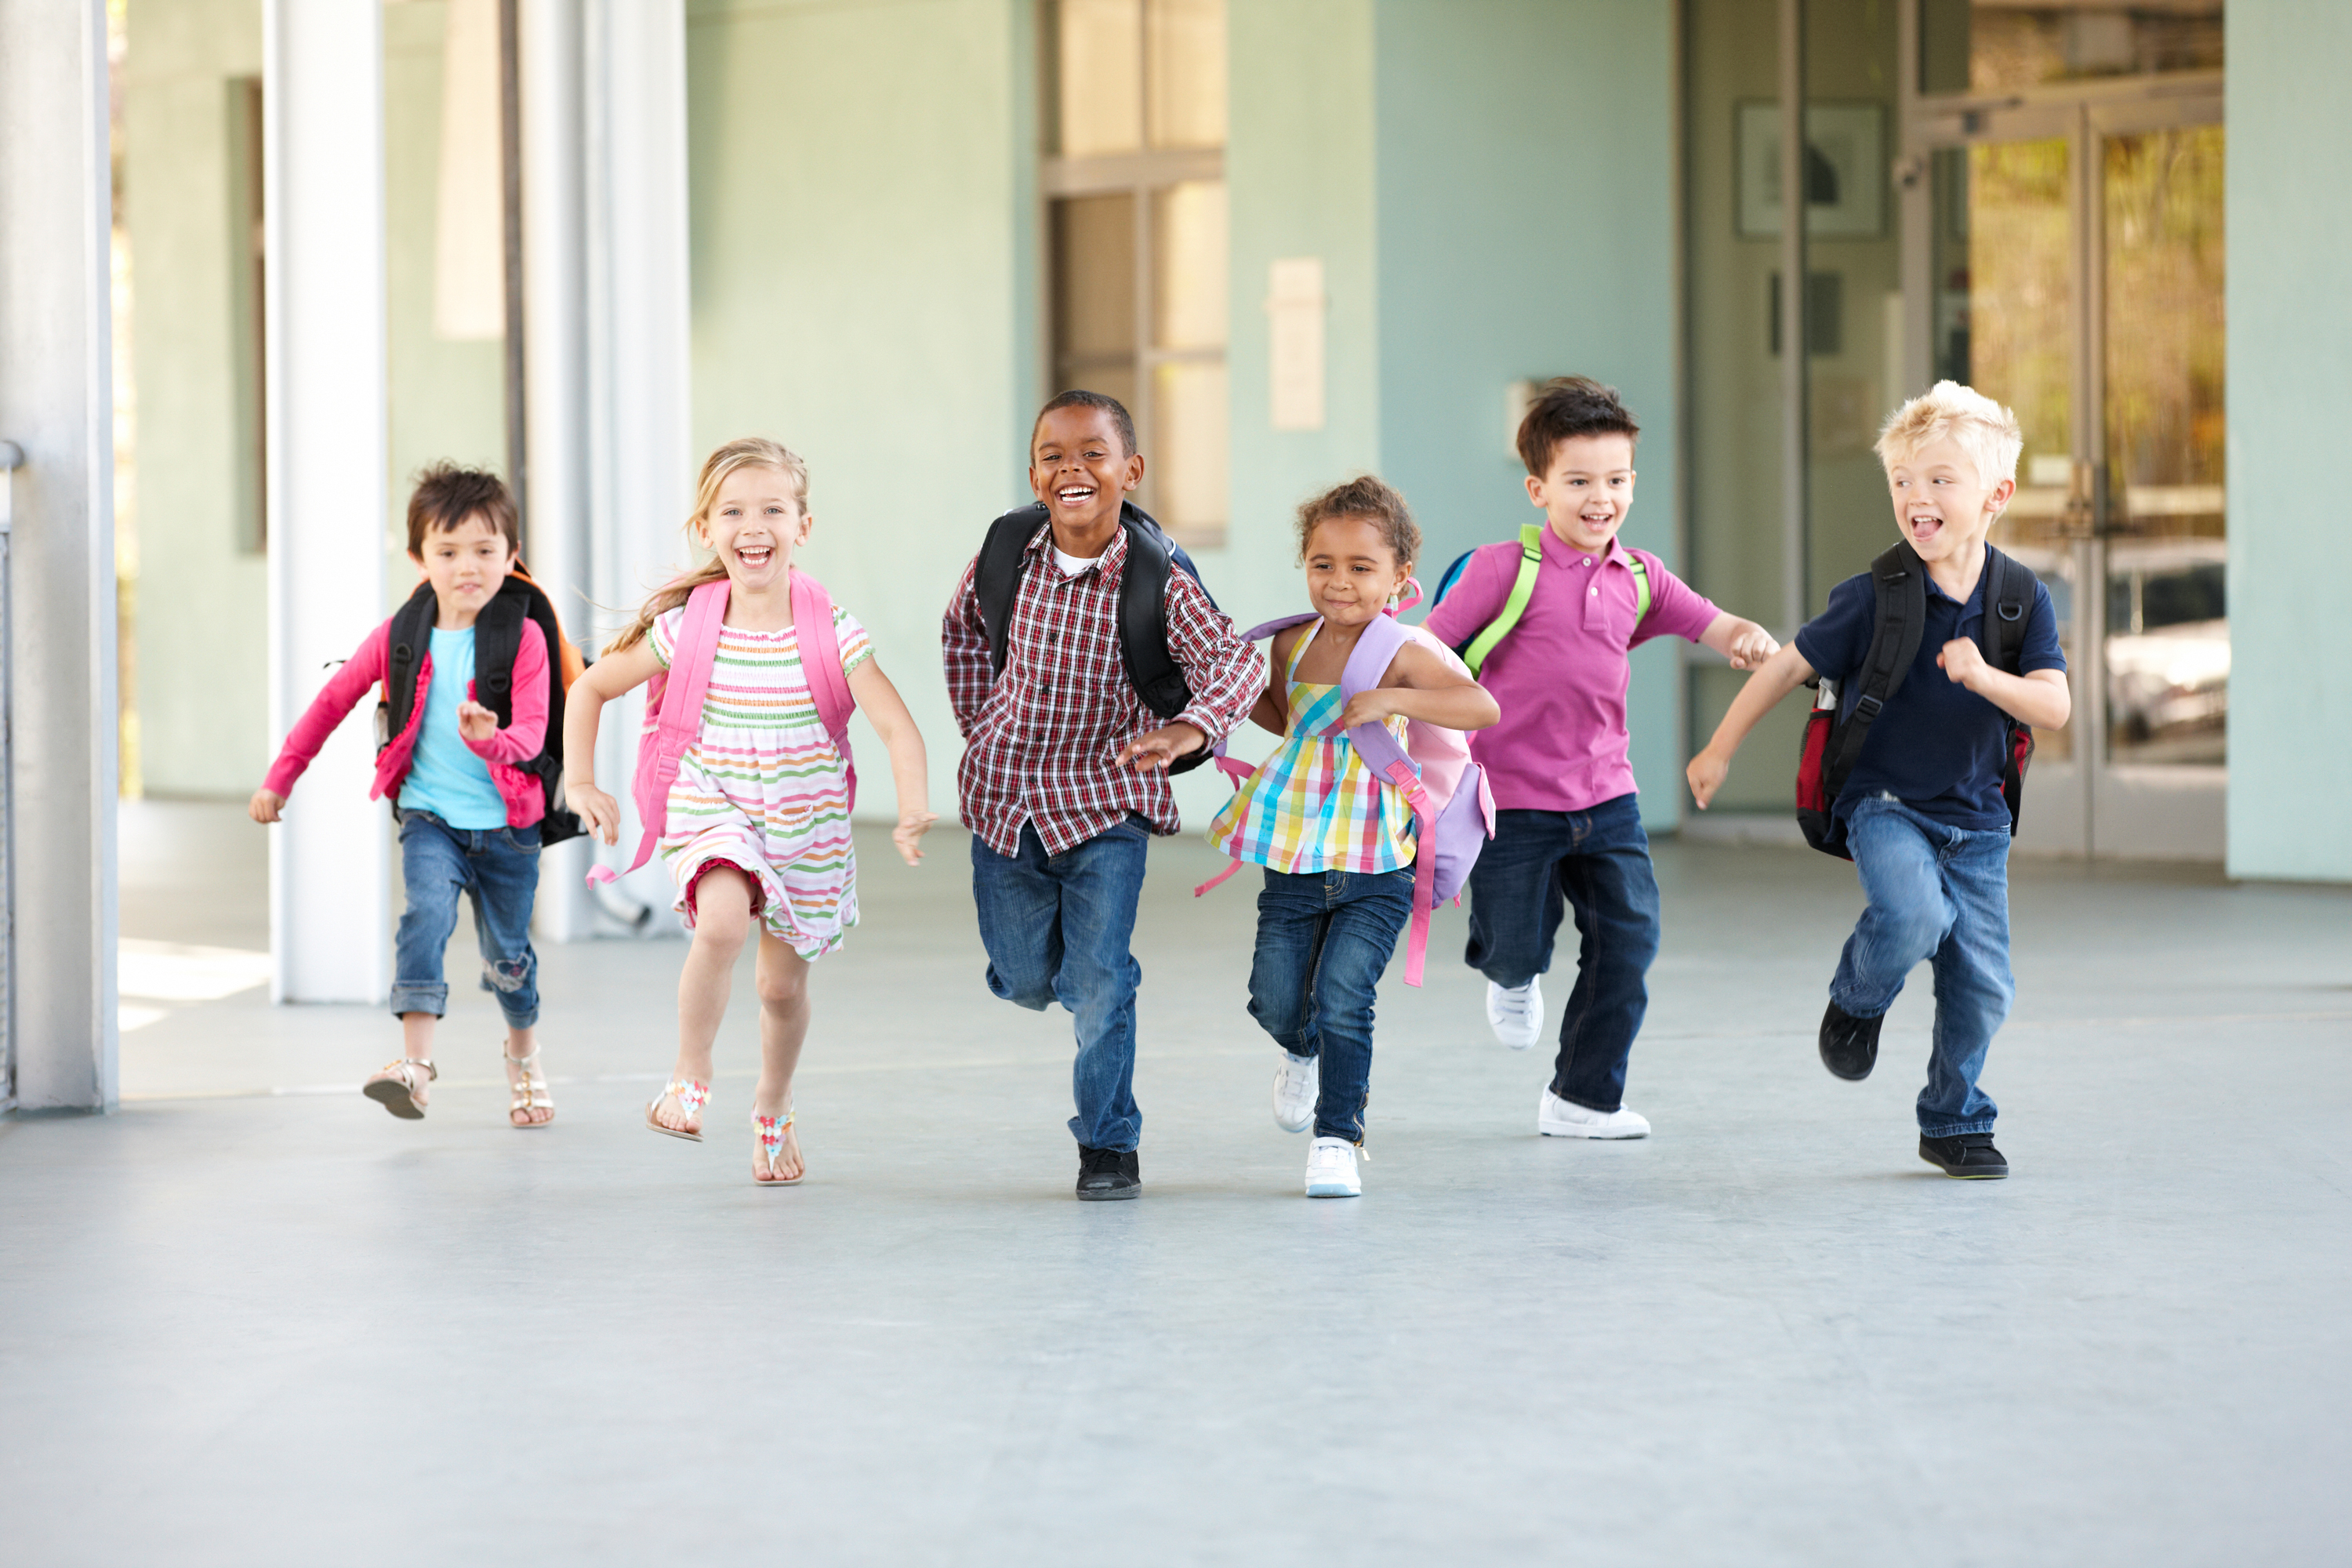 A group of children of different genders and ethnicities runs down a hallway.